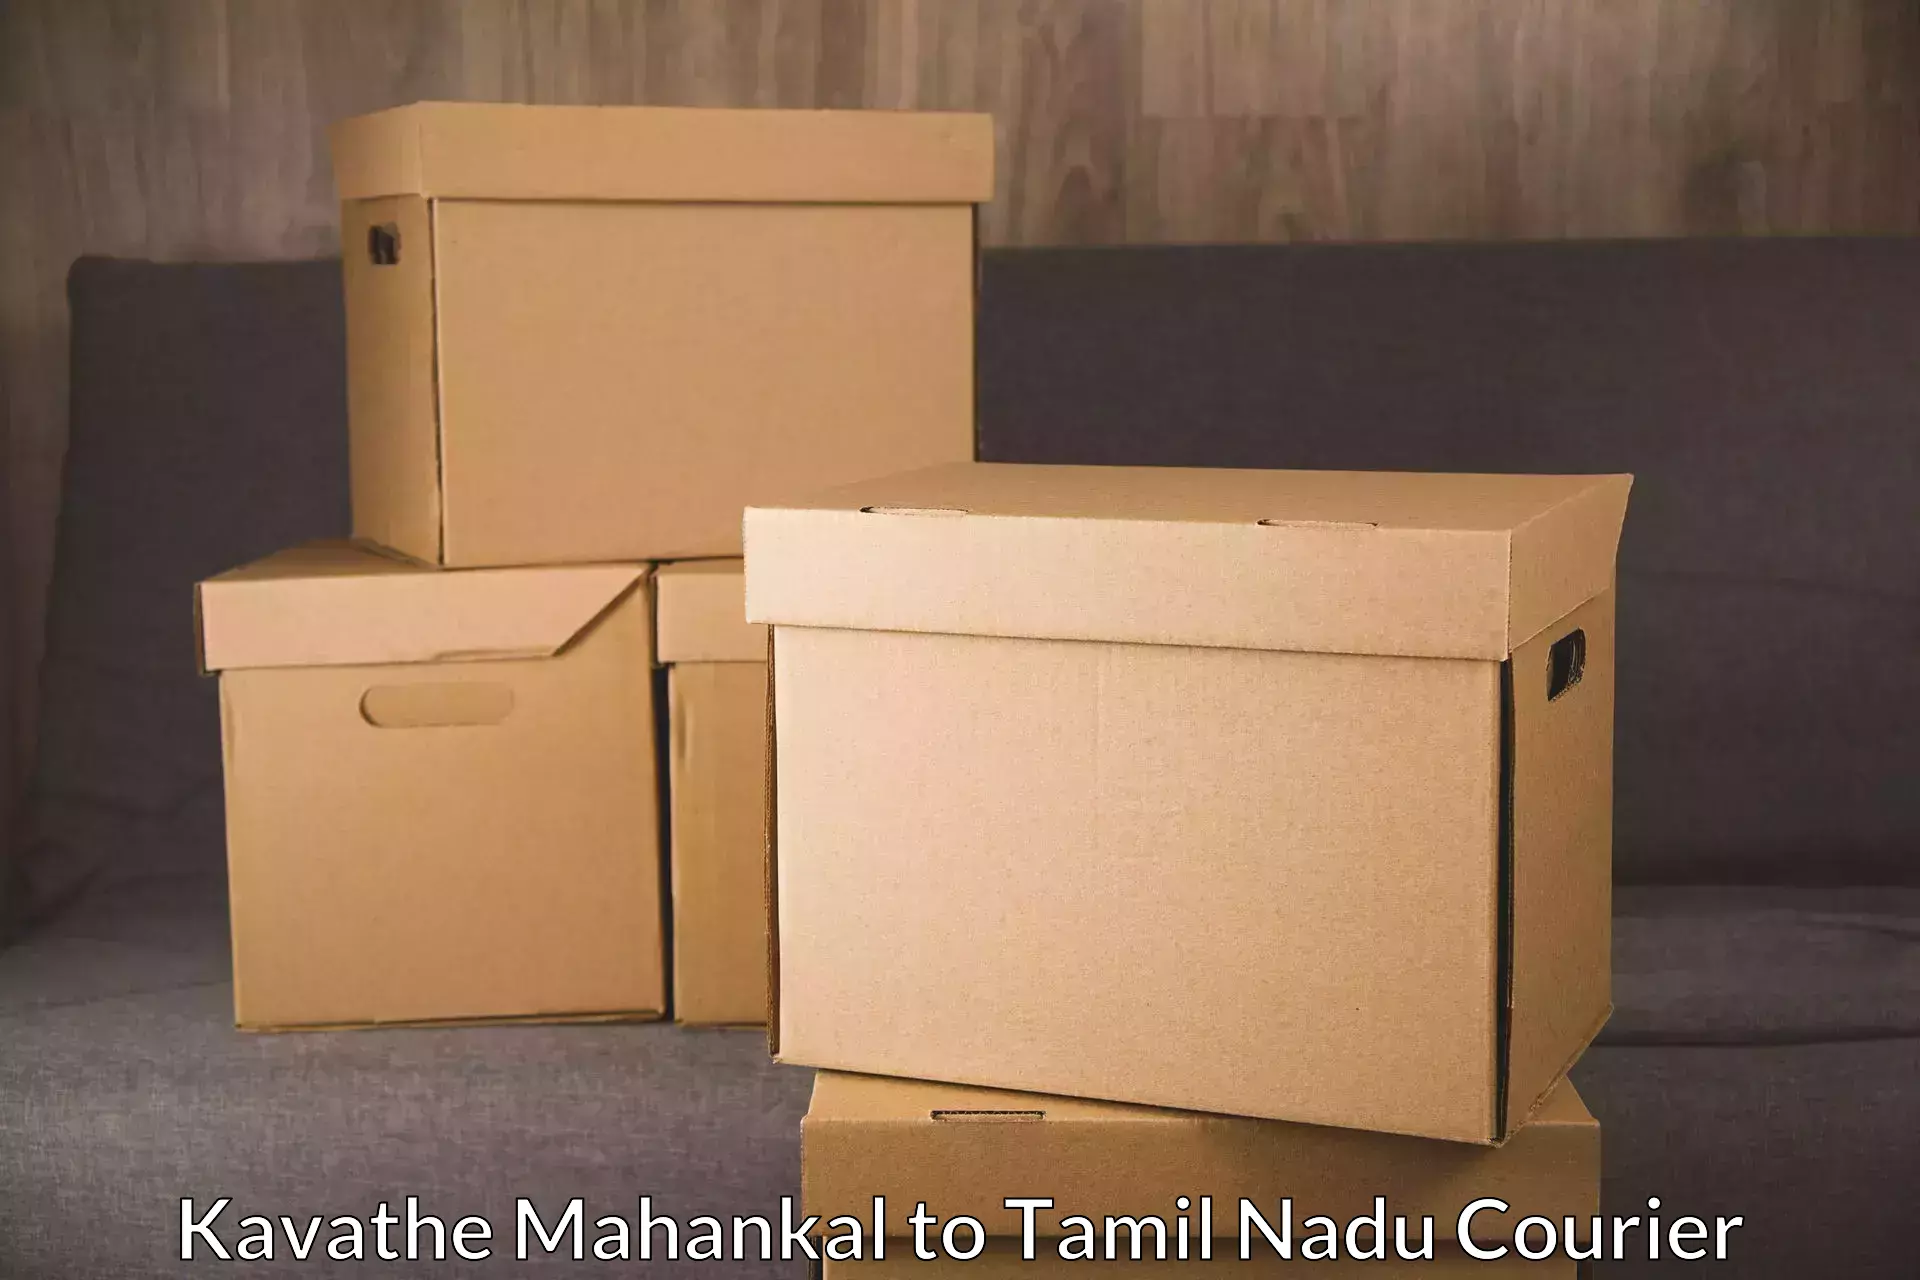 Overnight delivery services Kavathe Mahankal to Surandai